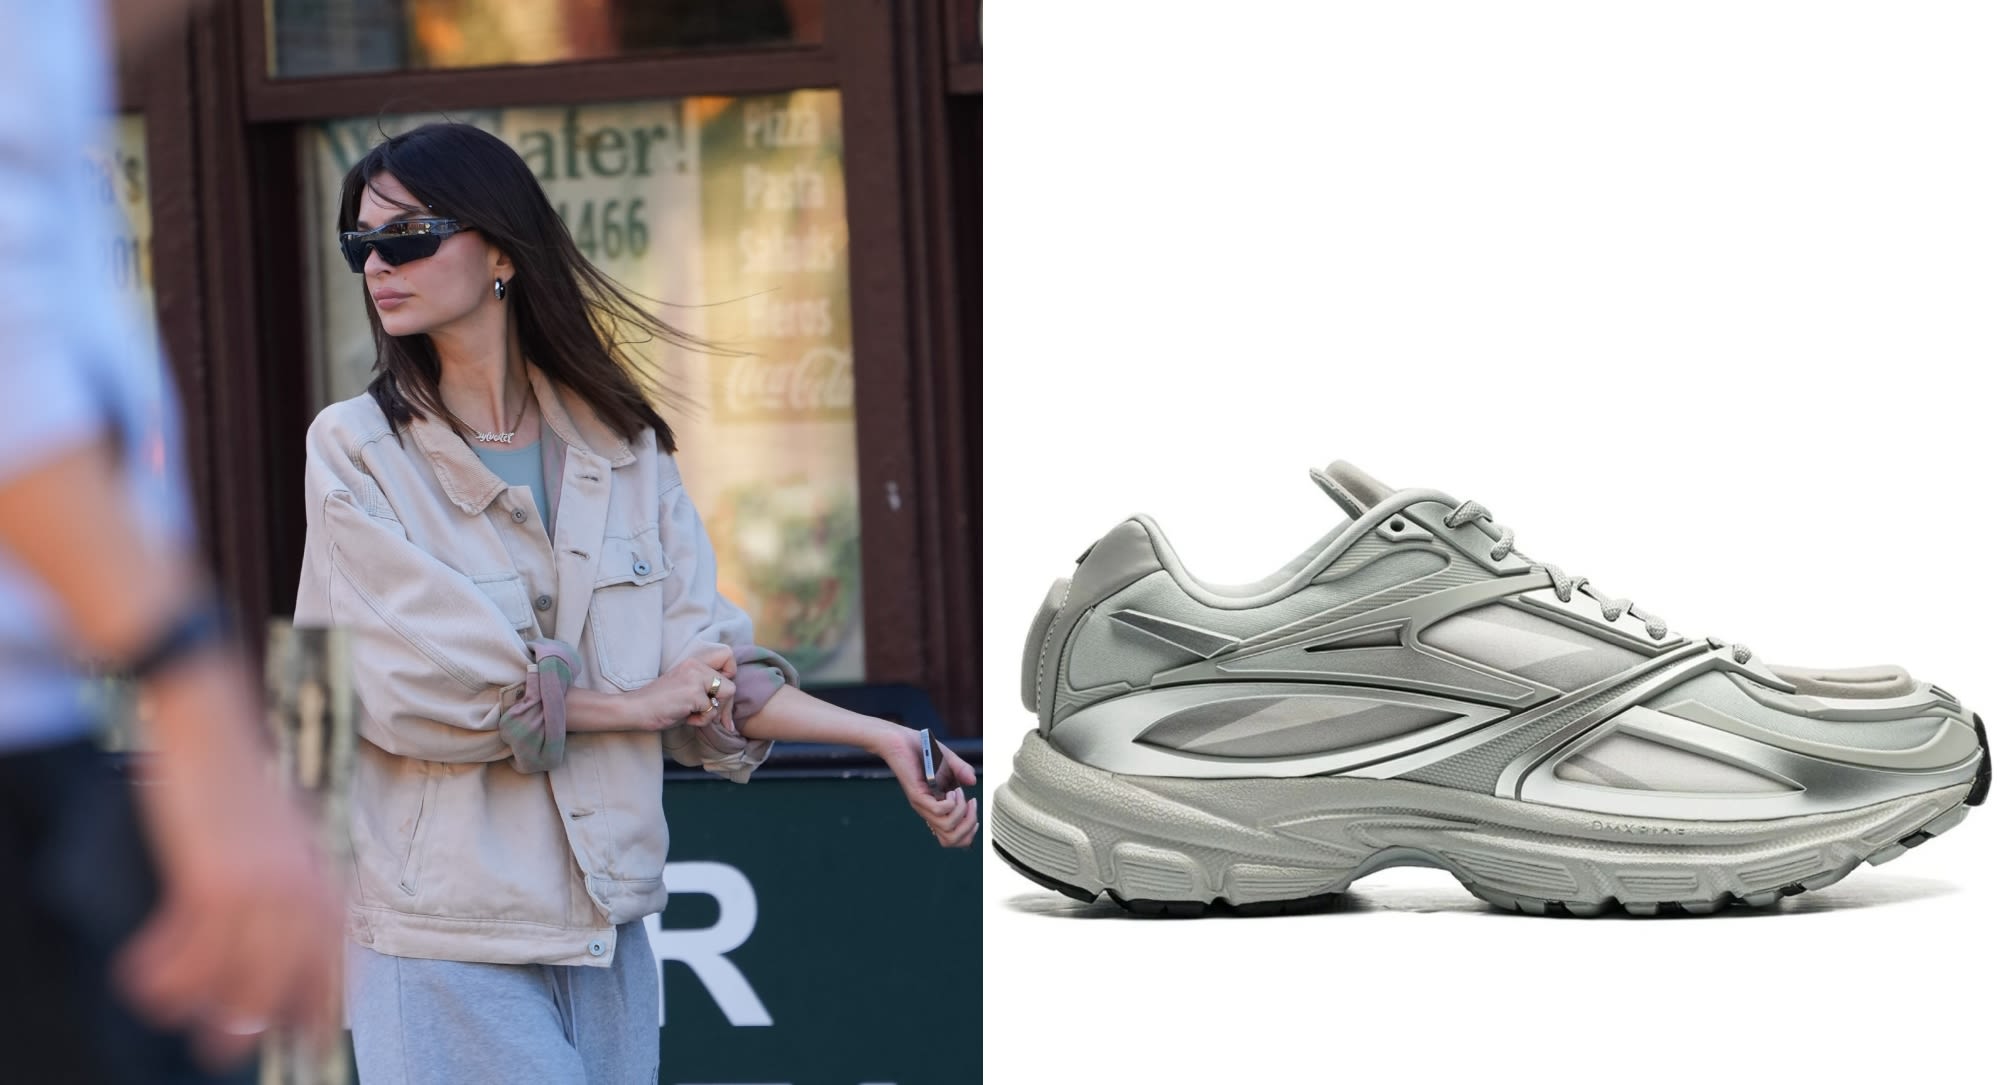 Emily Ratajkowski Takes Off-Duty Style to the Streets of New York in Gray Reebok LTD Premier Road Modern Dad Sneakers